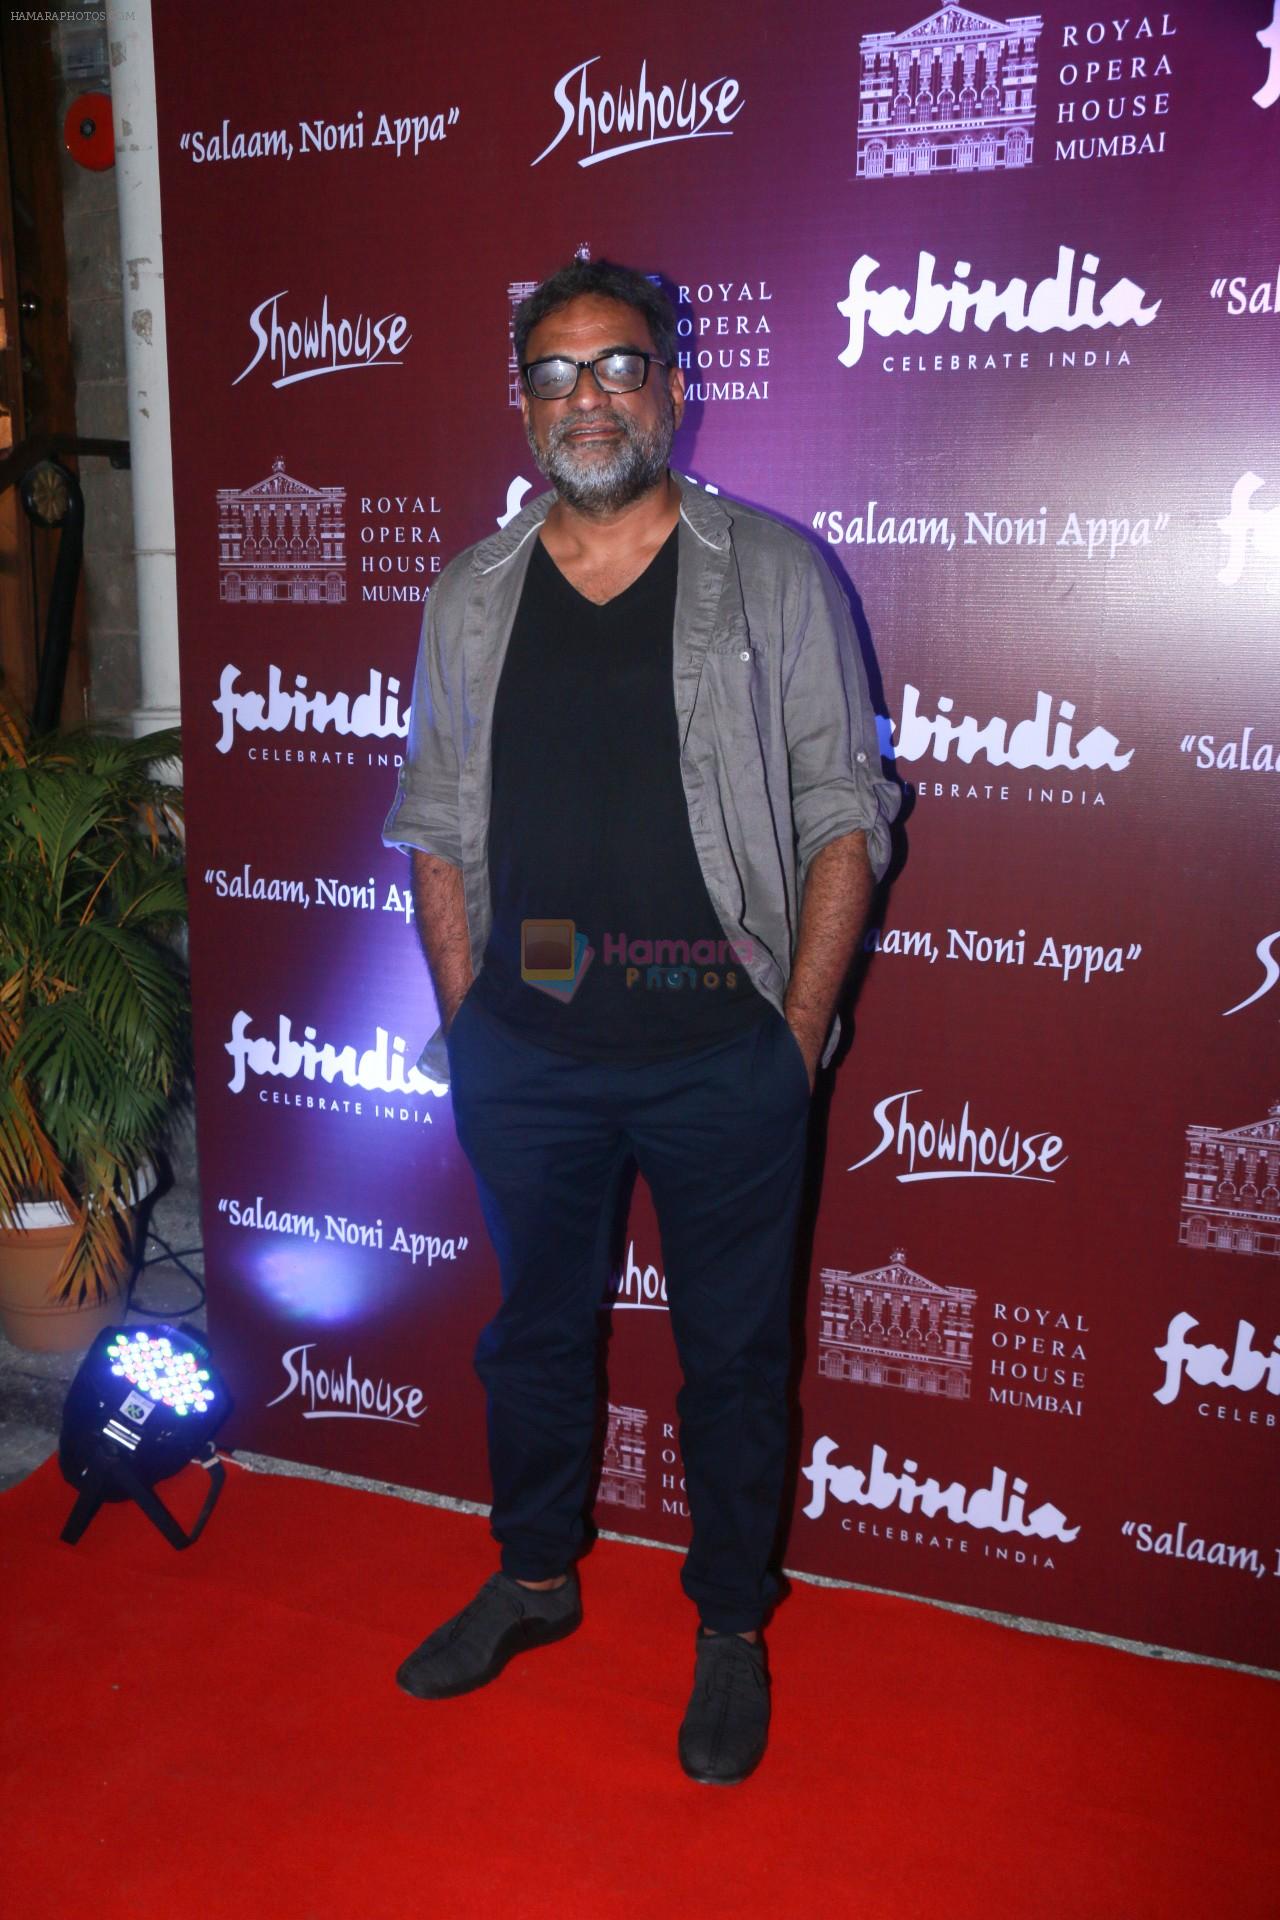 R Balki at the Special preview of Salaam Noni Appa based on Twinkle Khanna's novel at Royal Opera House in mumbai on 28th Oct 2017